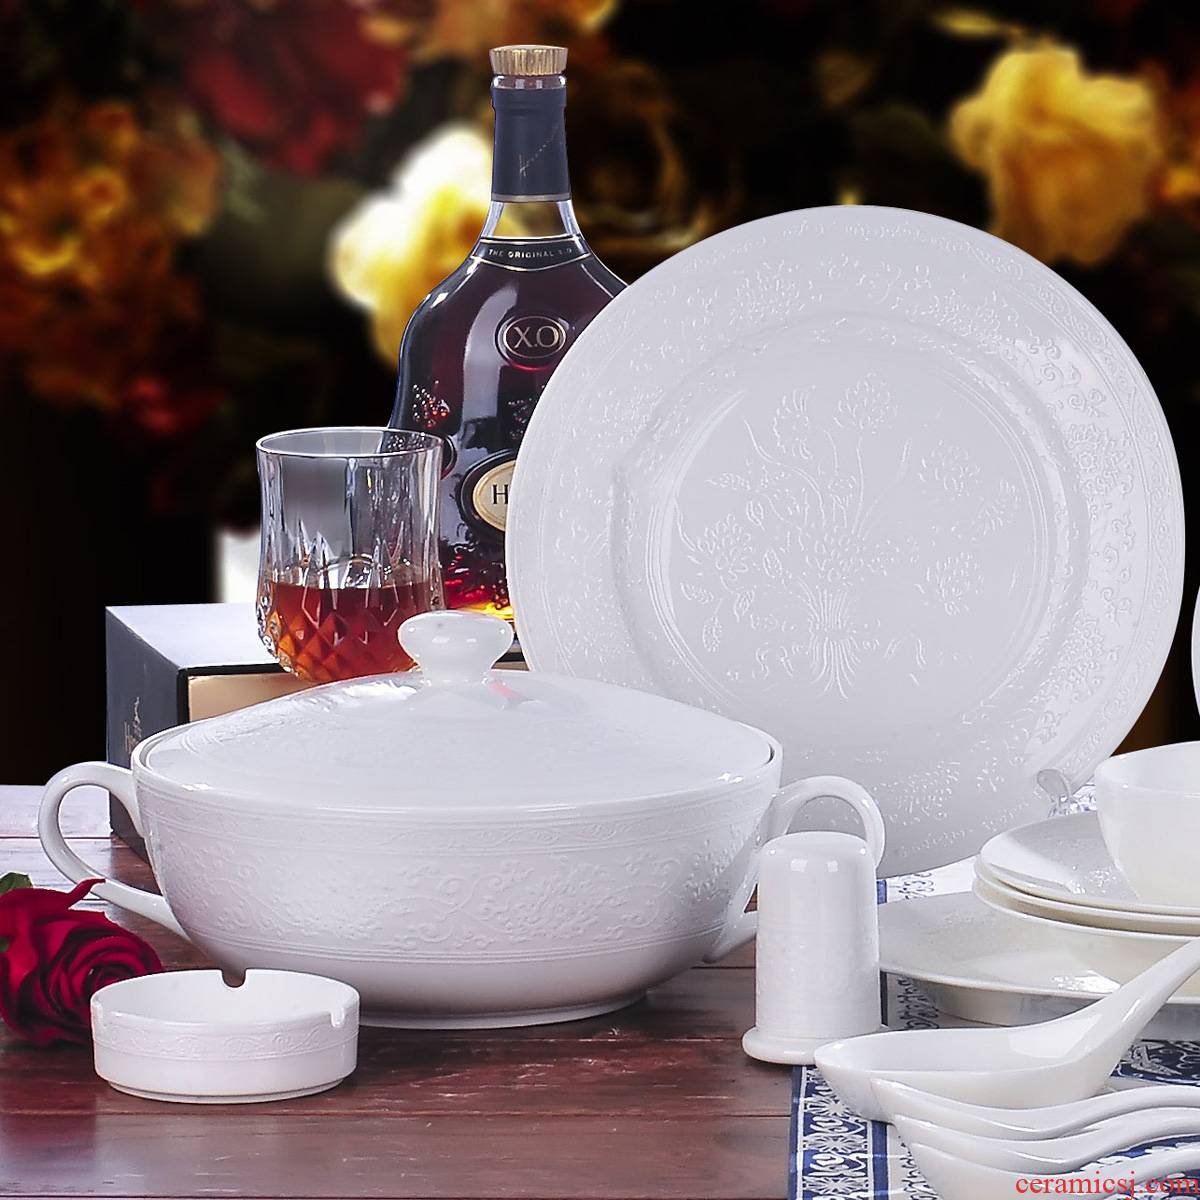 Red xin 56 head of jingdezhen ceramic tableware suit to use dishes Chinese porcelain tableware ceramic bowl white reliefs